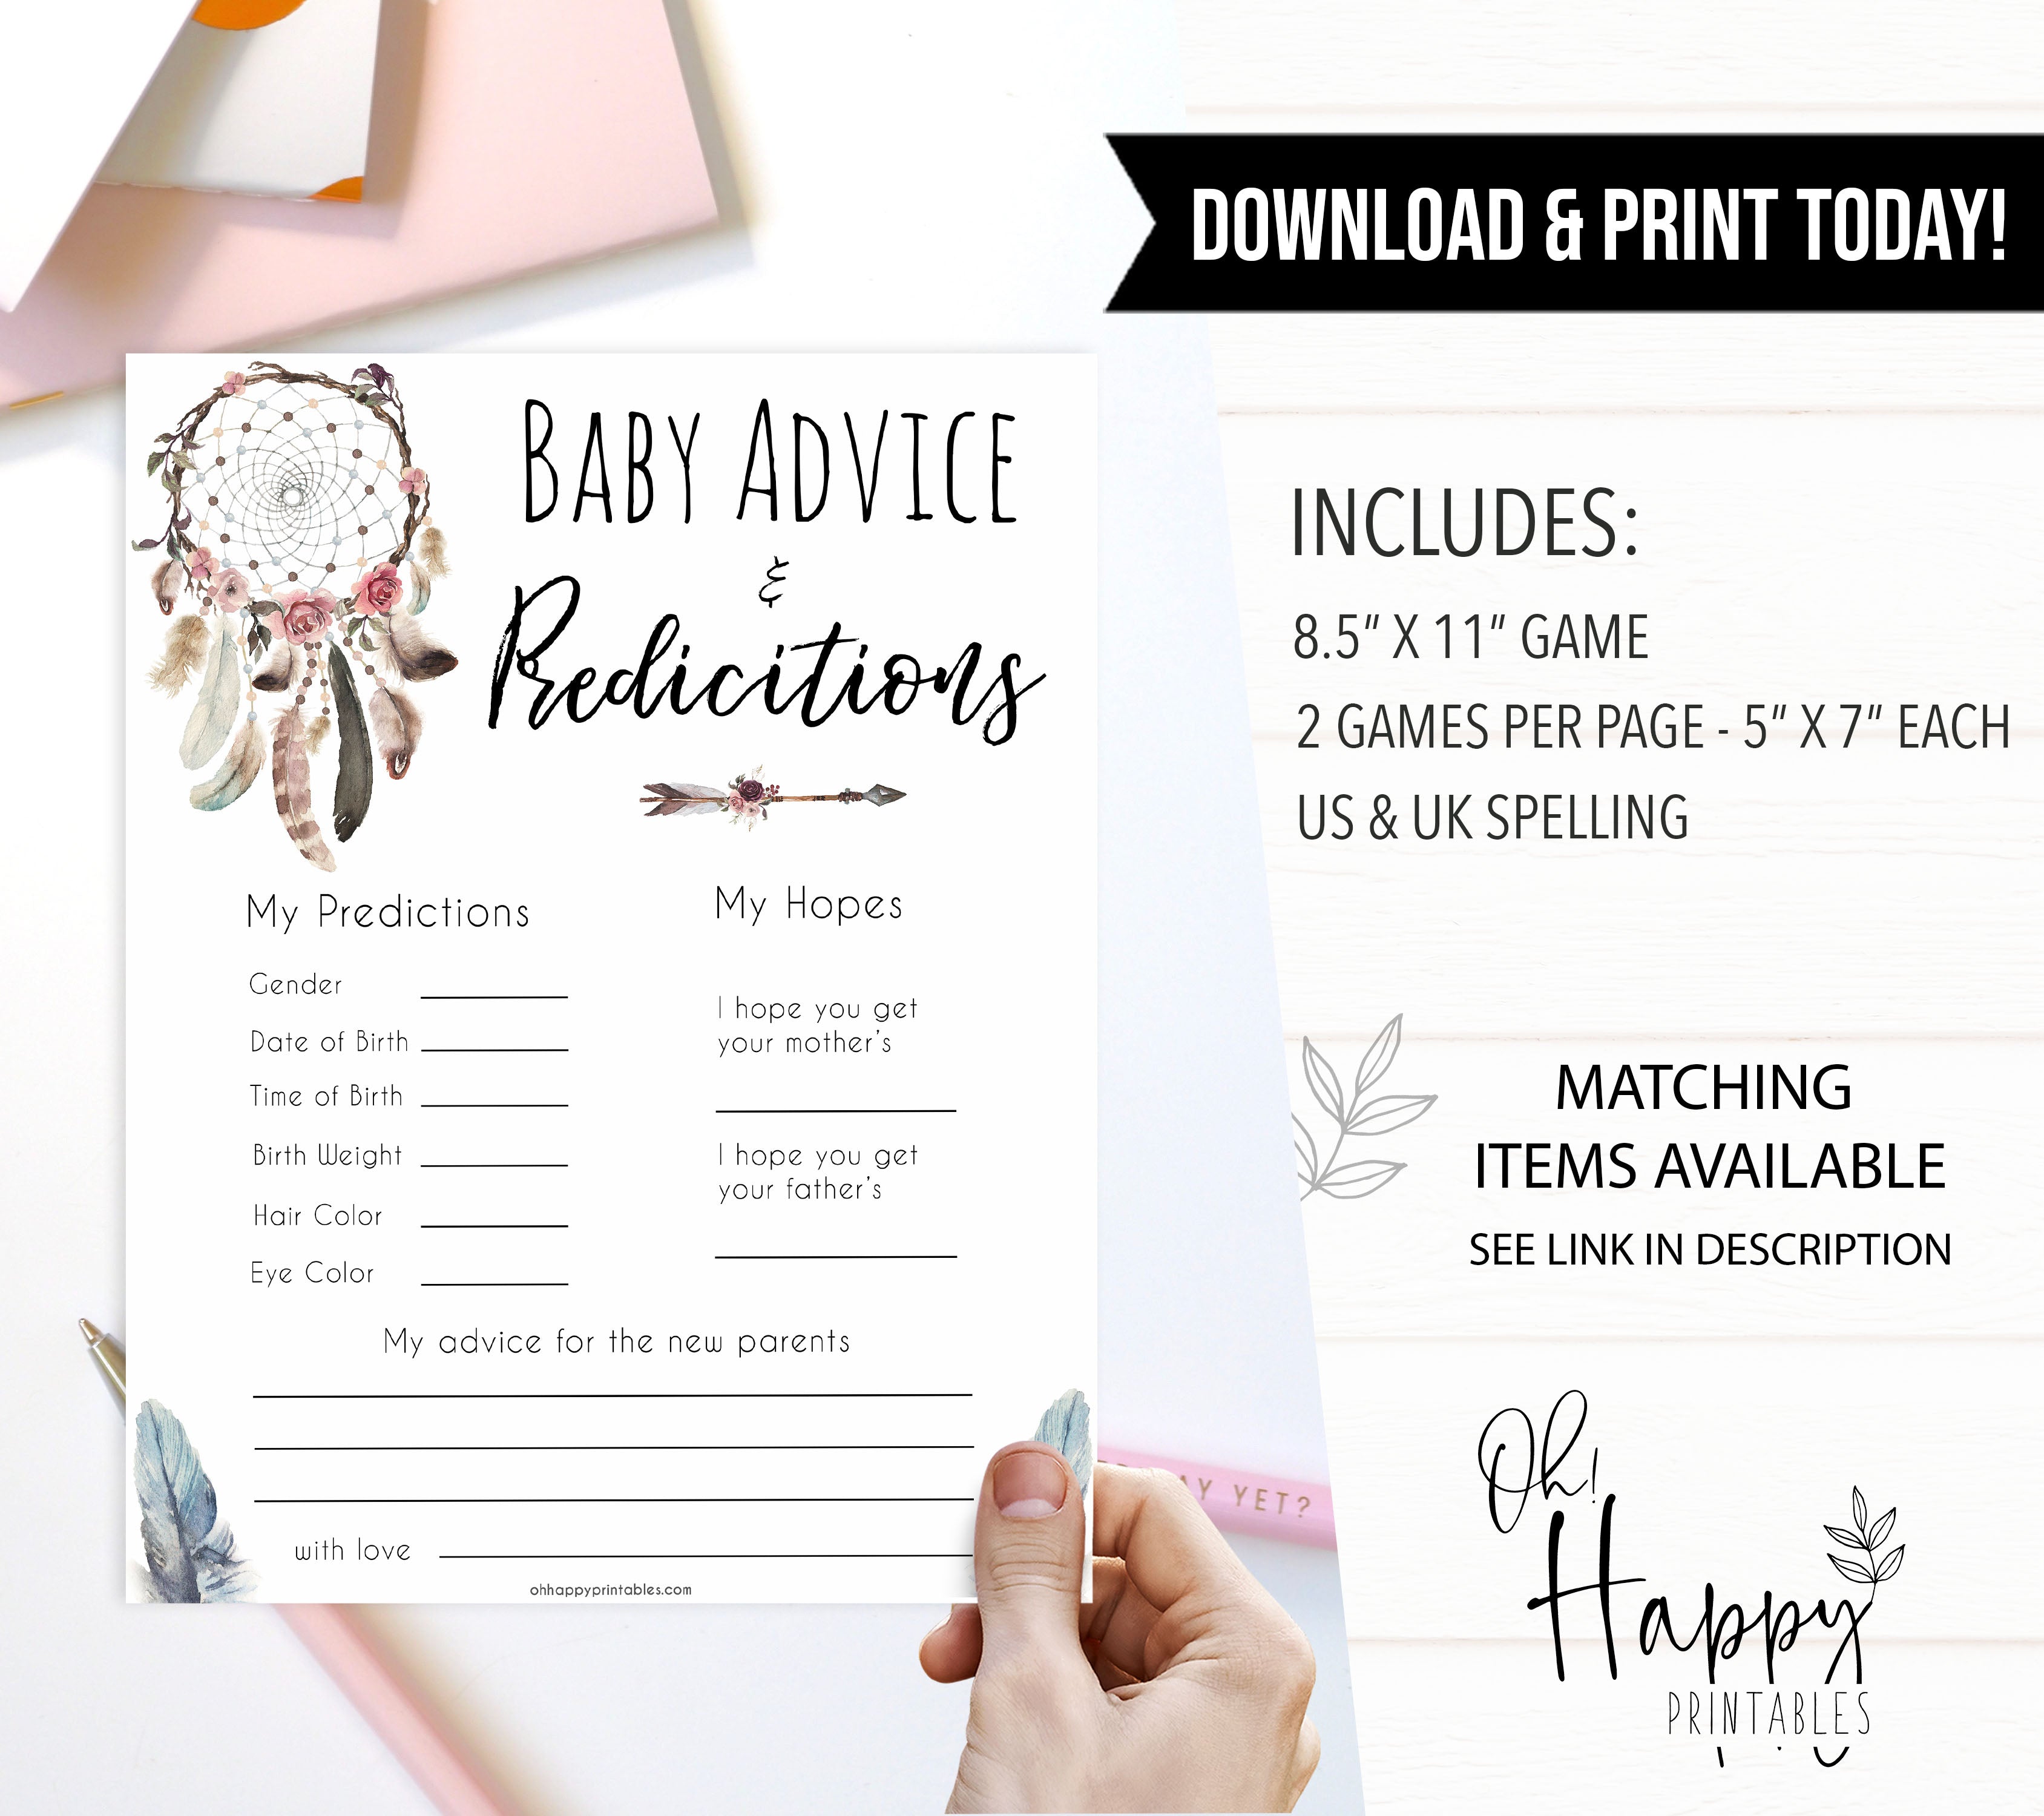 Boho baby games, baby advice and predictions baby game, fun baby games, printable baby games, top 10 baby games, boho baby shower, baby games, hilarious baby games